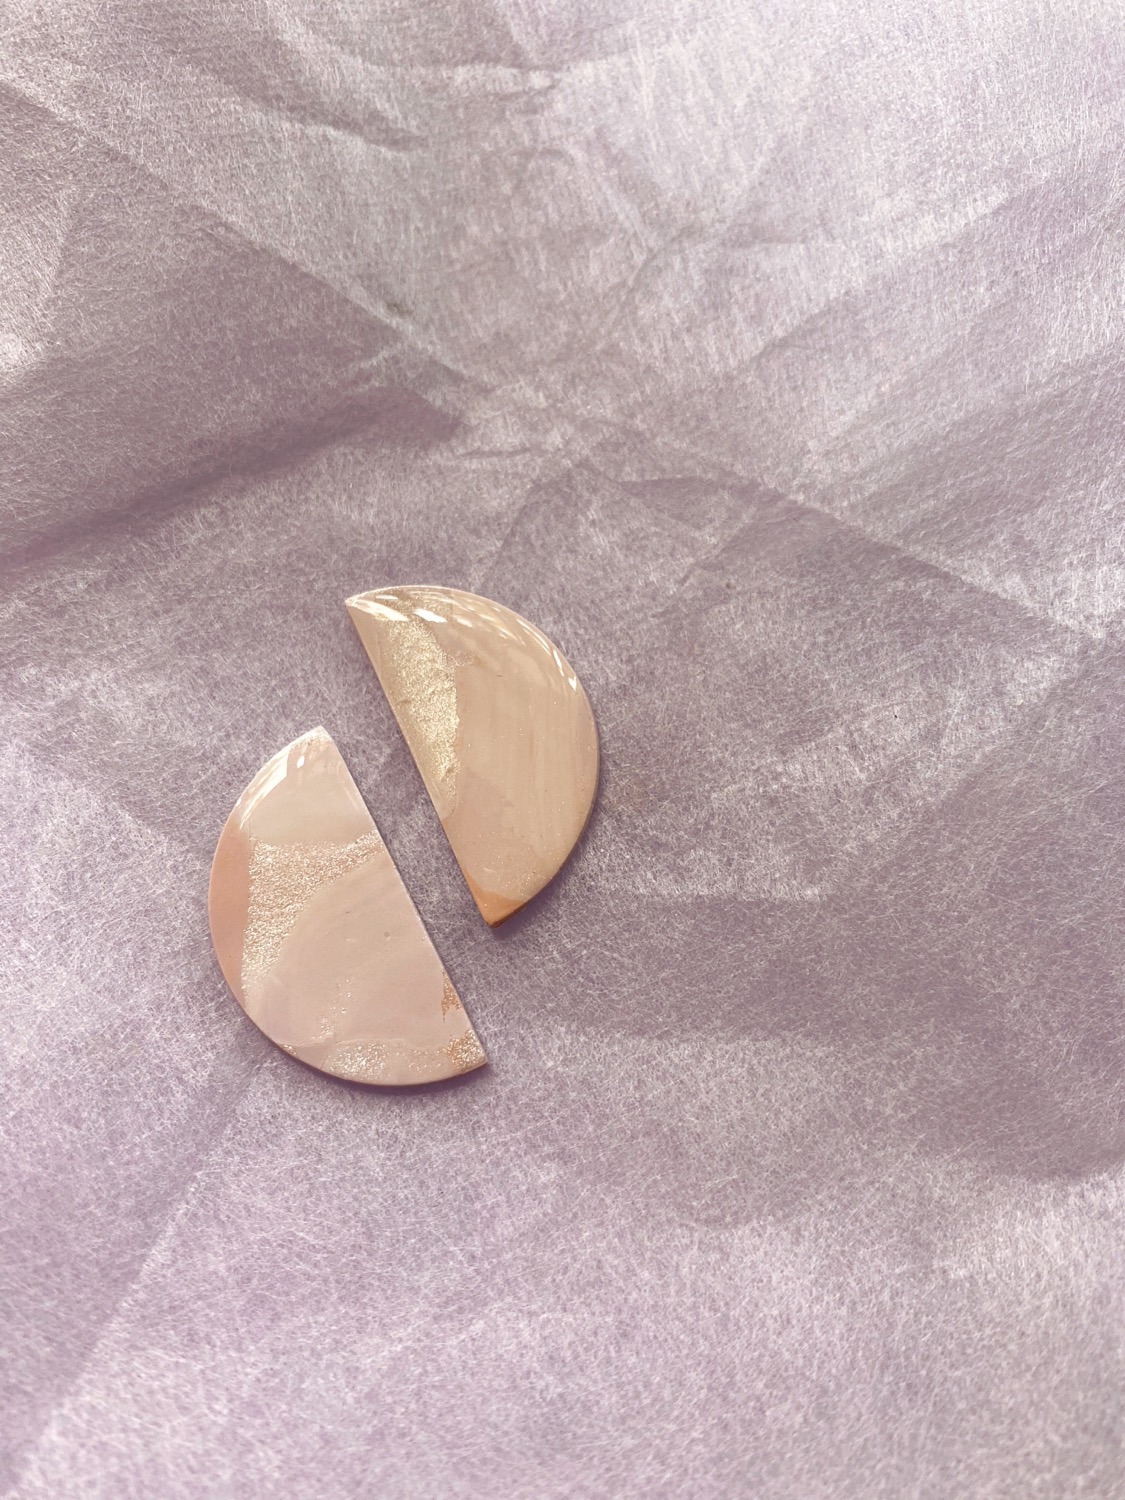 Coated Marble (rose Marble) - Half Moon Studs, Polymer Clay Earrings